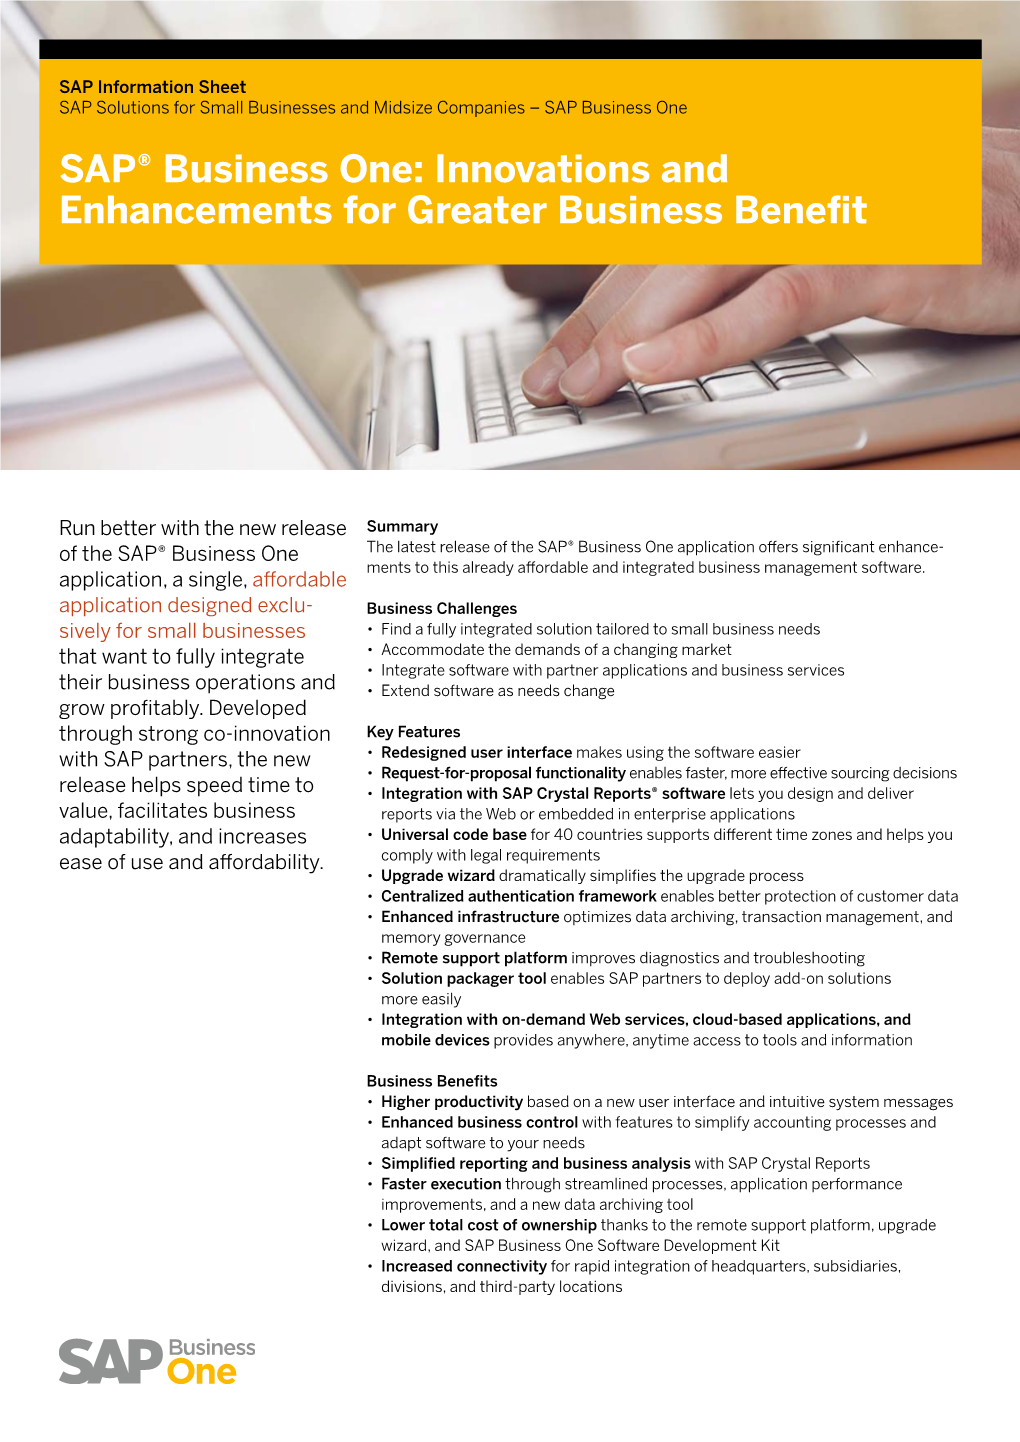 SAP® Business One: Innovations and Enhancements for Greater Business Benefit